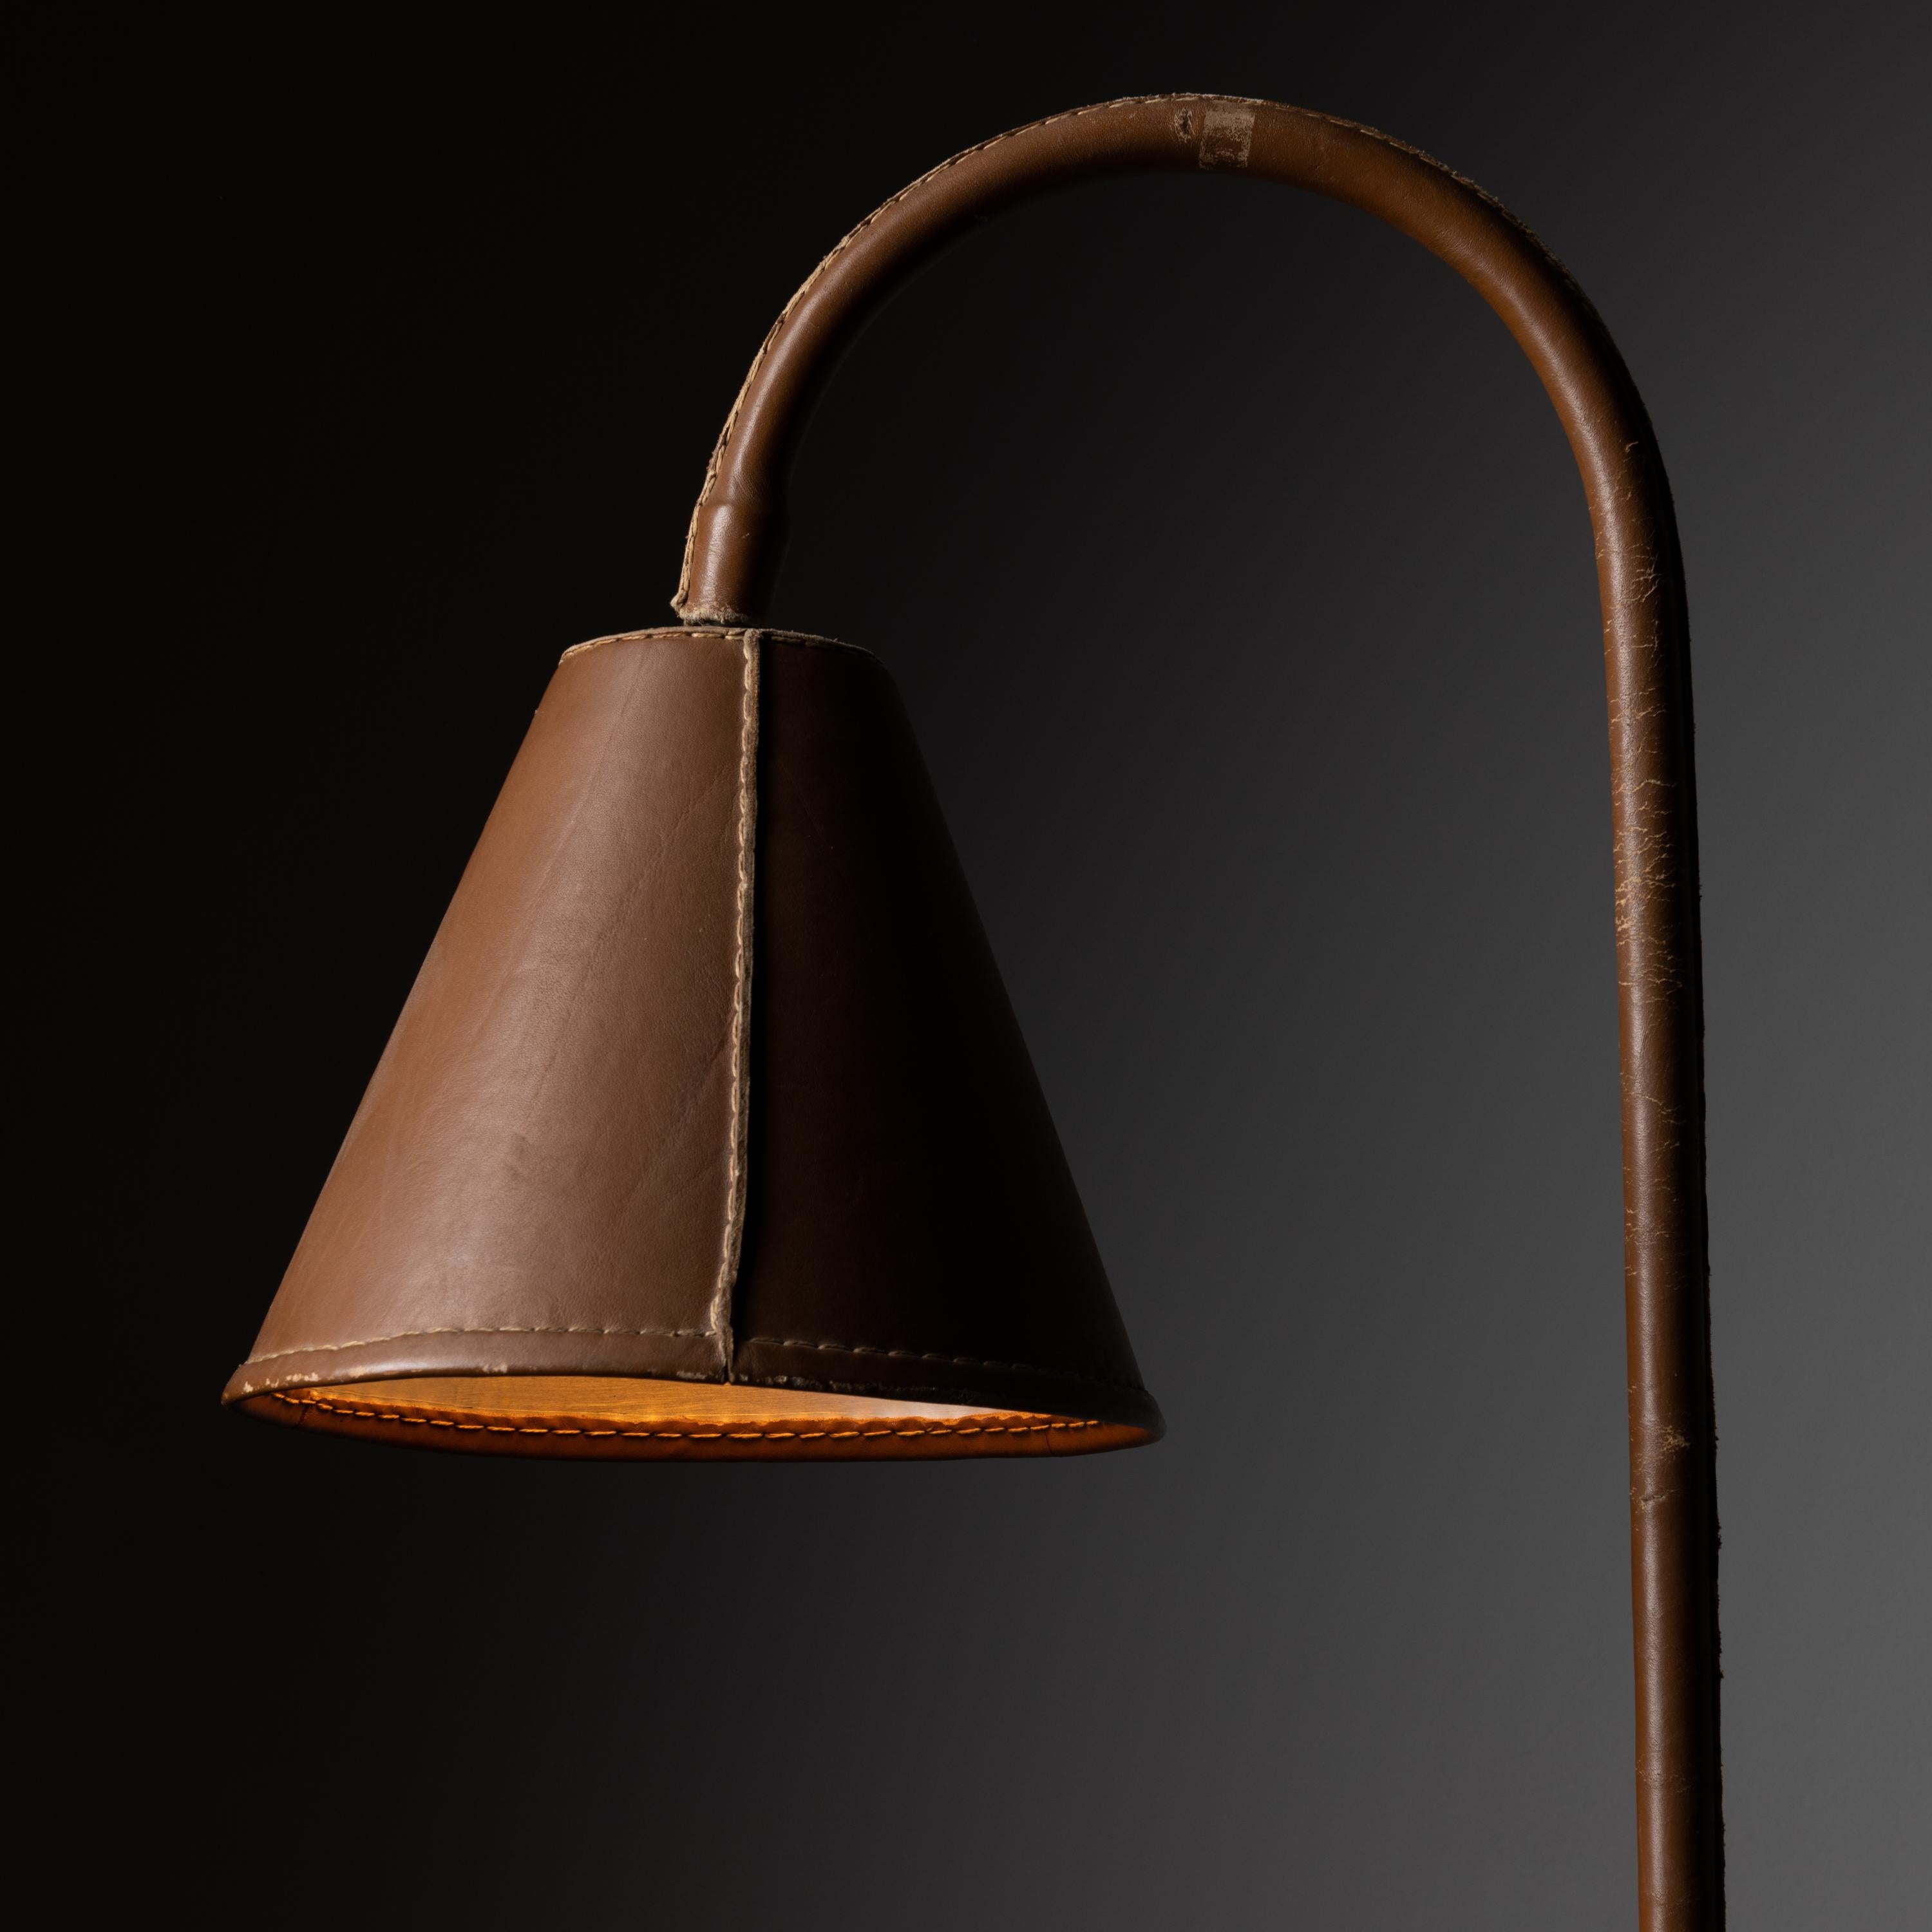 Spanish Leather Floor Lamp by Jacques Adnet for Valenti